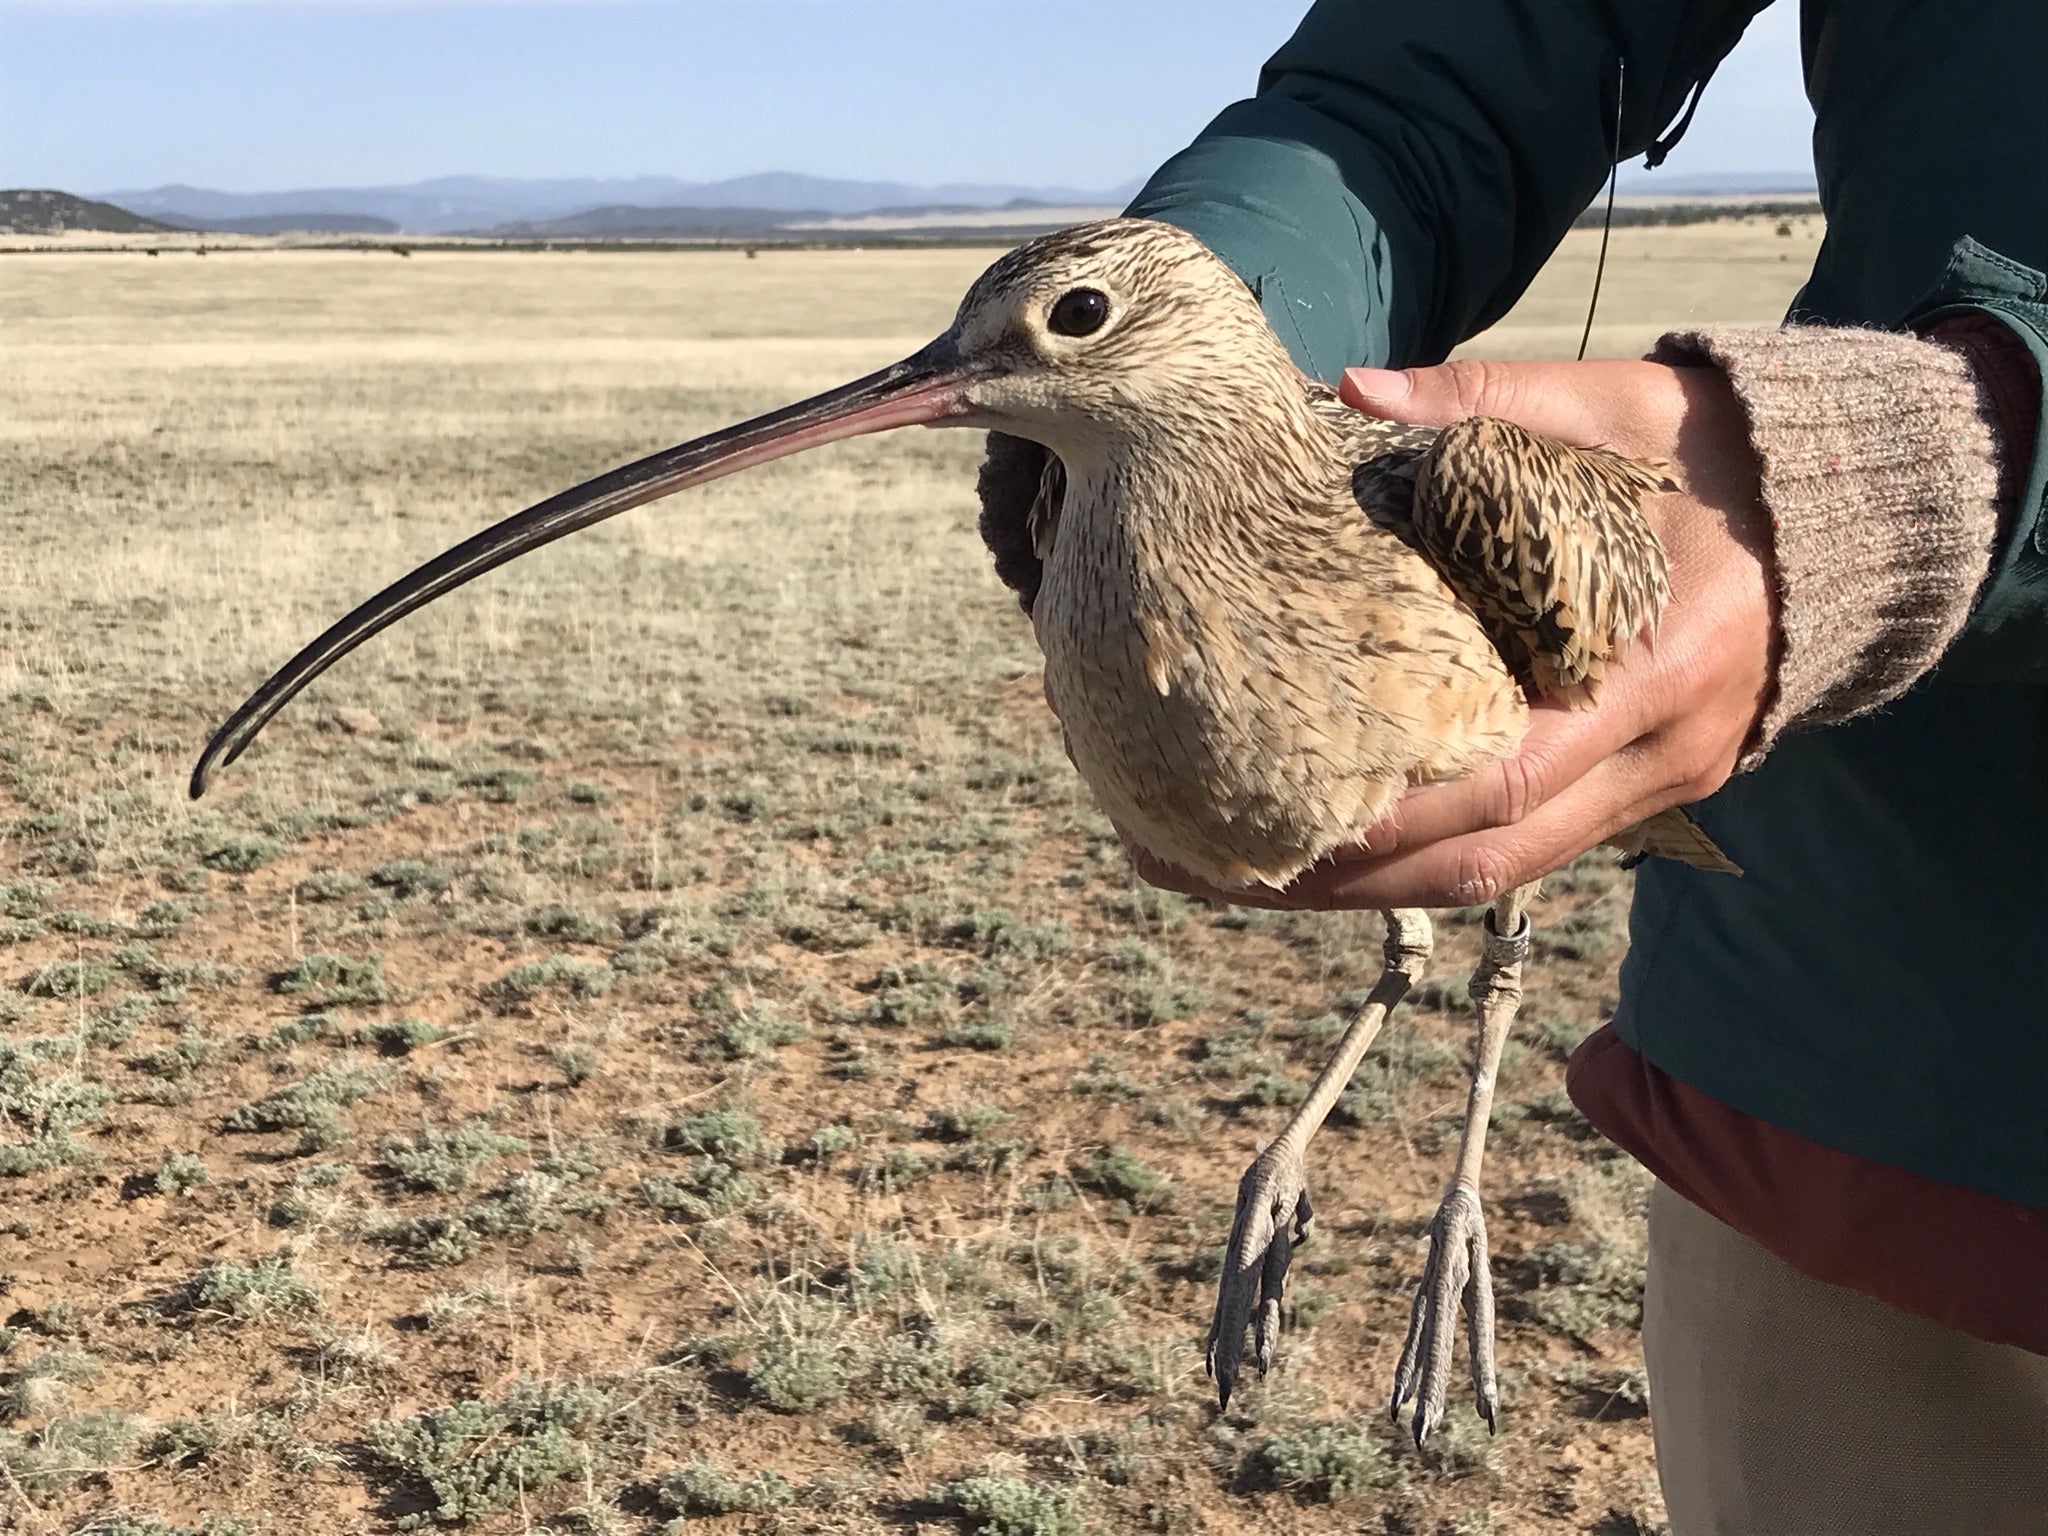 Close up of a Long-billed Curlew named being held. The transmitter antenna is visible poking up from his back.